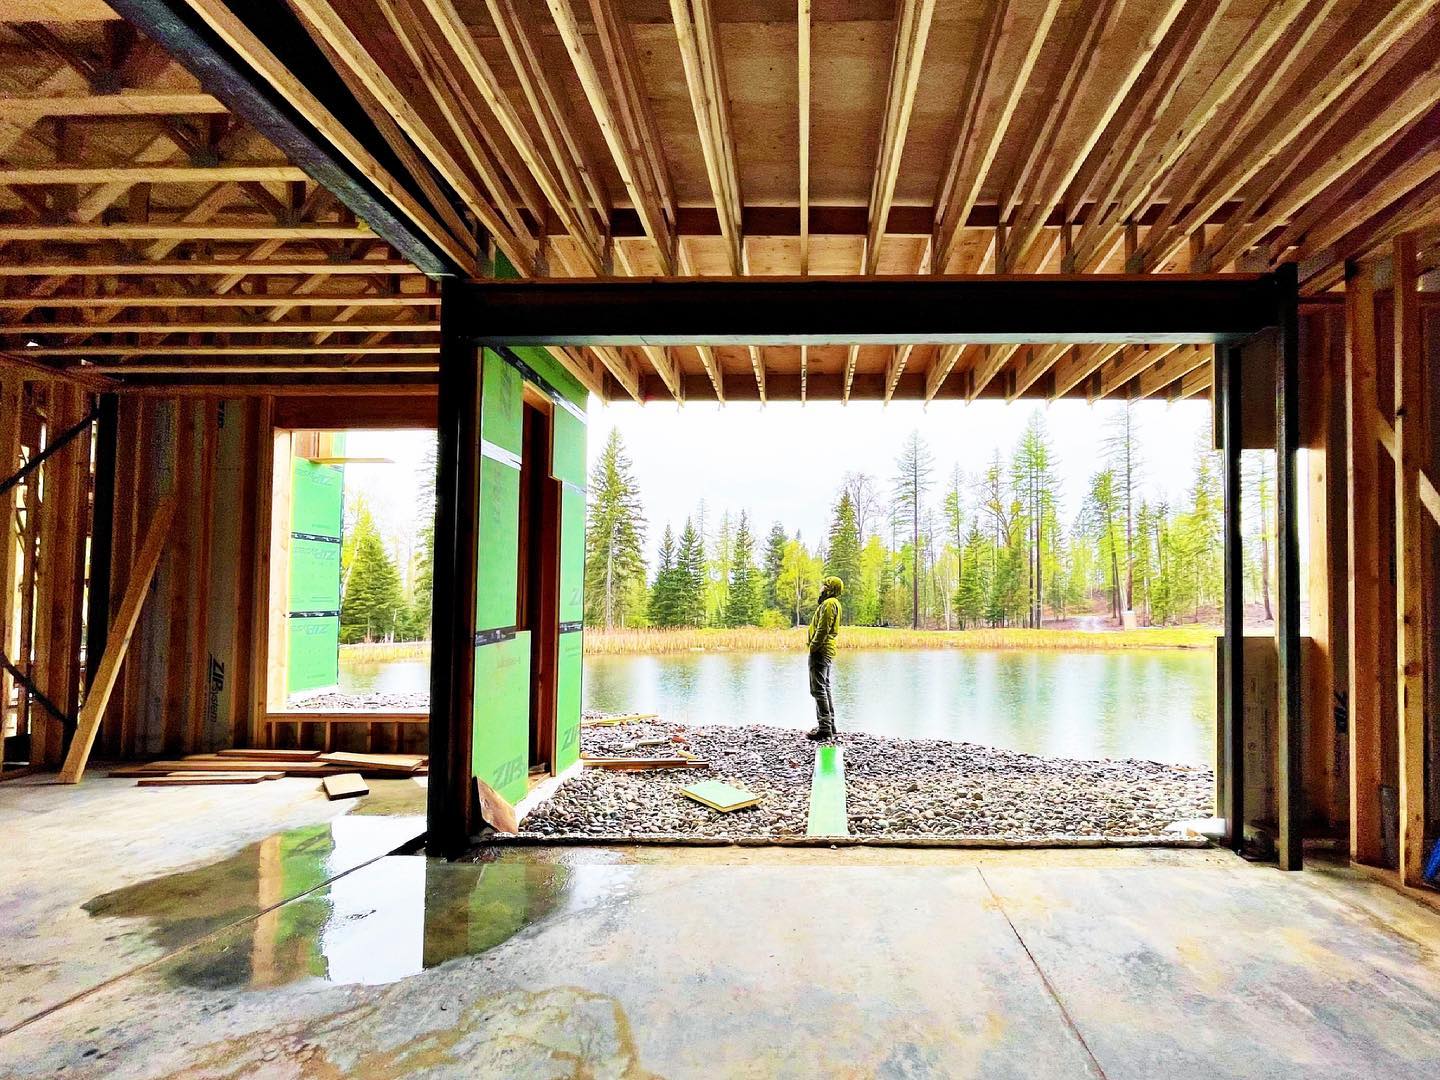 We could almost float out of this house today in this rain...but instead we are looking at how to set these massive windows. The project of the next 2 weeks! whitefish custom home builder